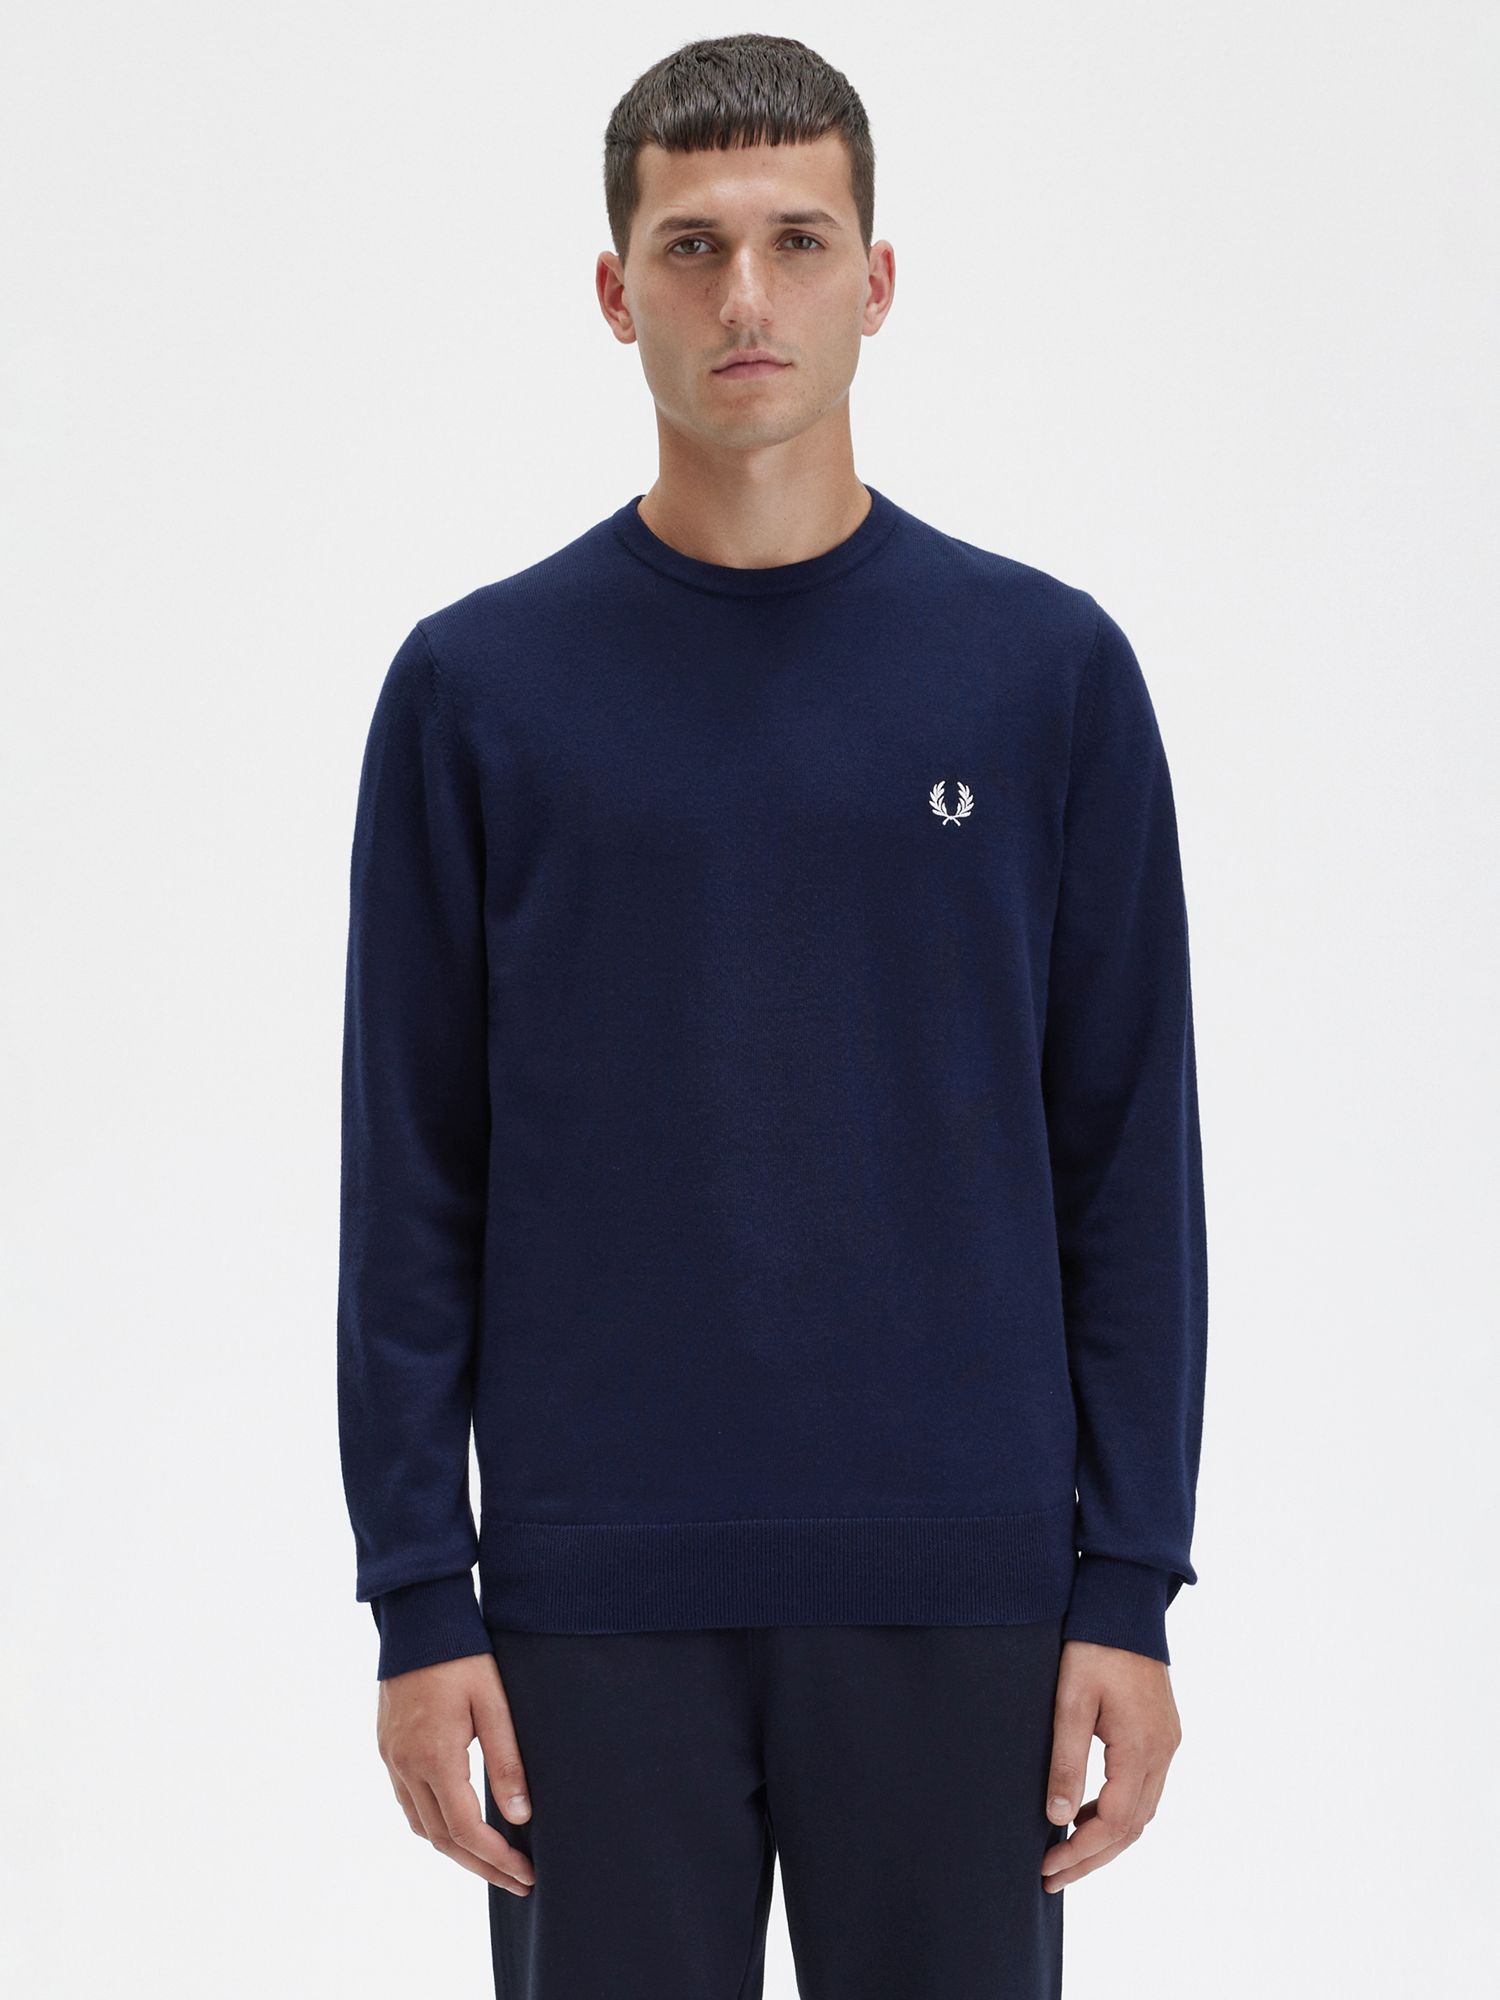 Fred Perry Classic Crew Neck Knit Jumper, Navy at John Lewis & Partners